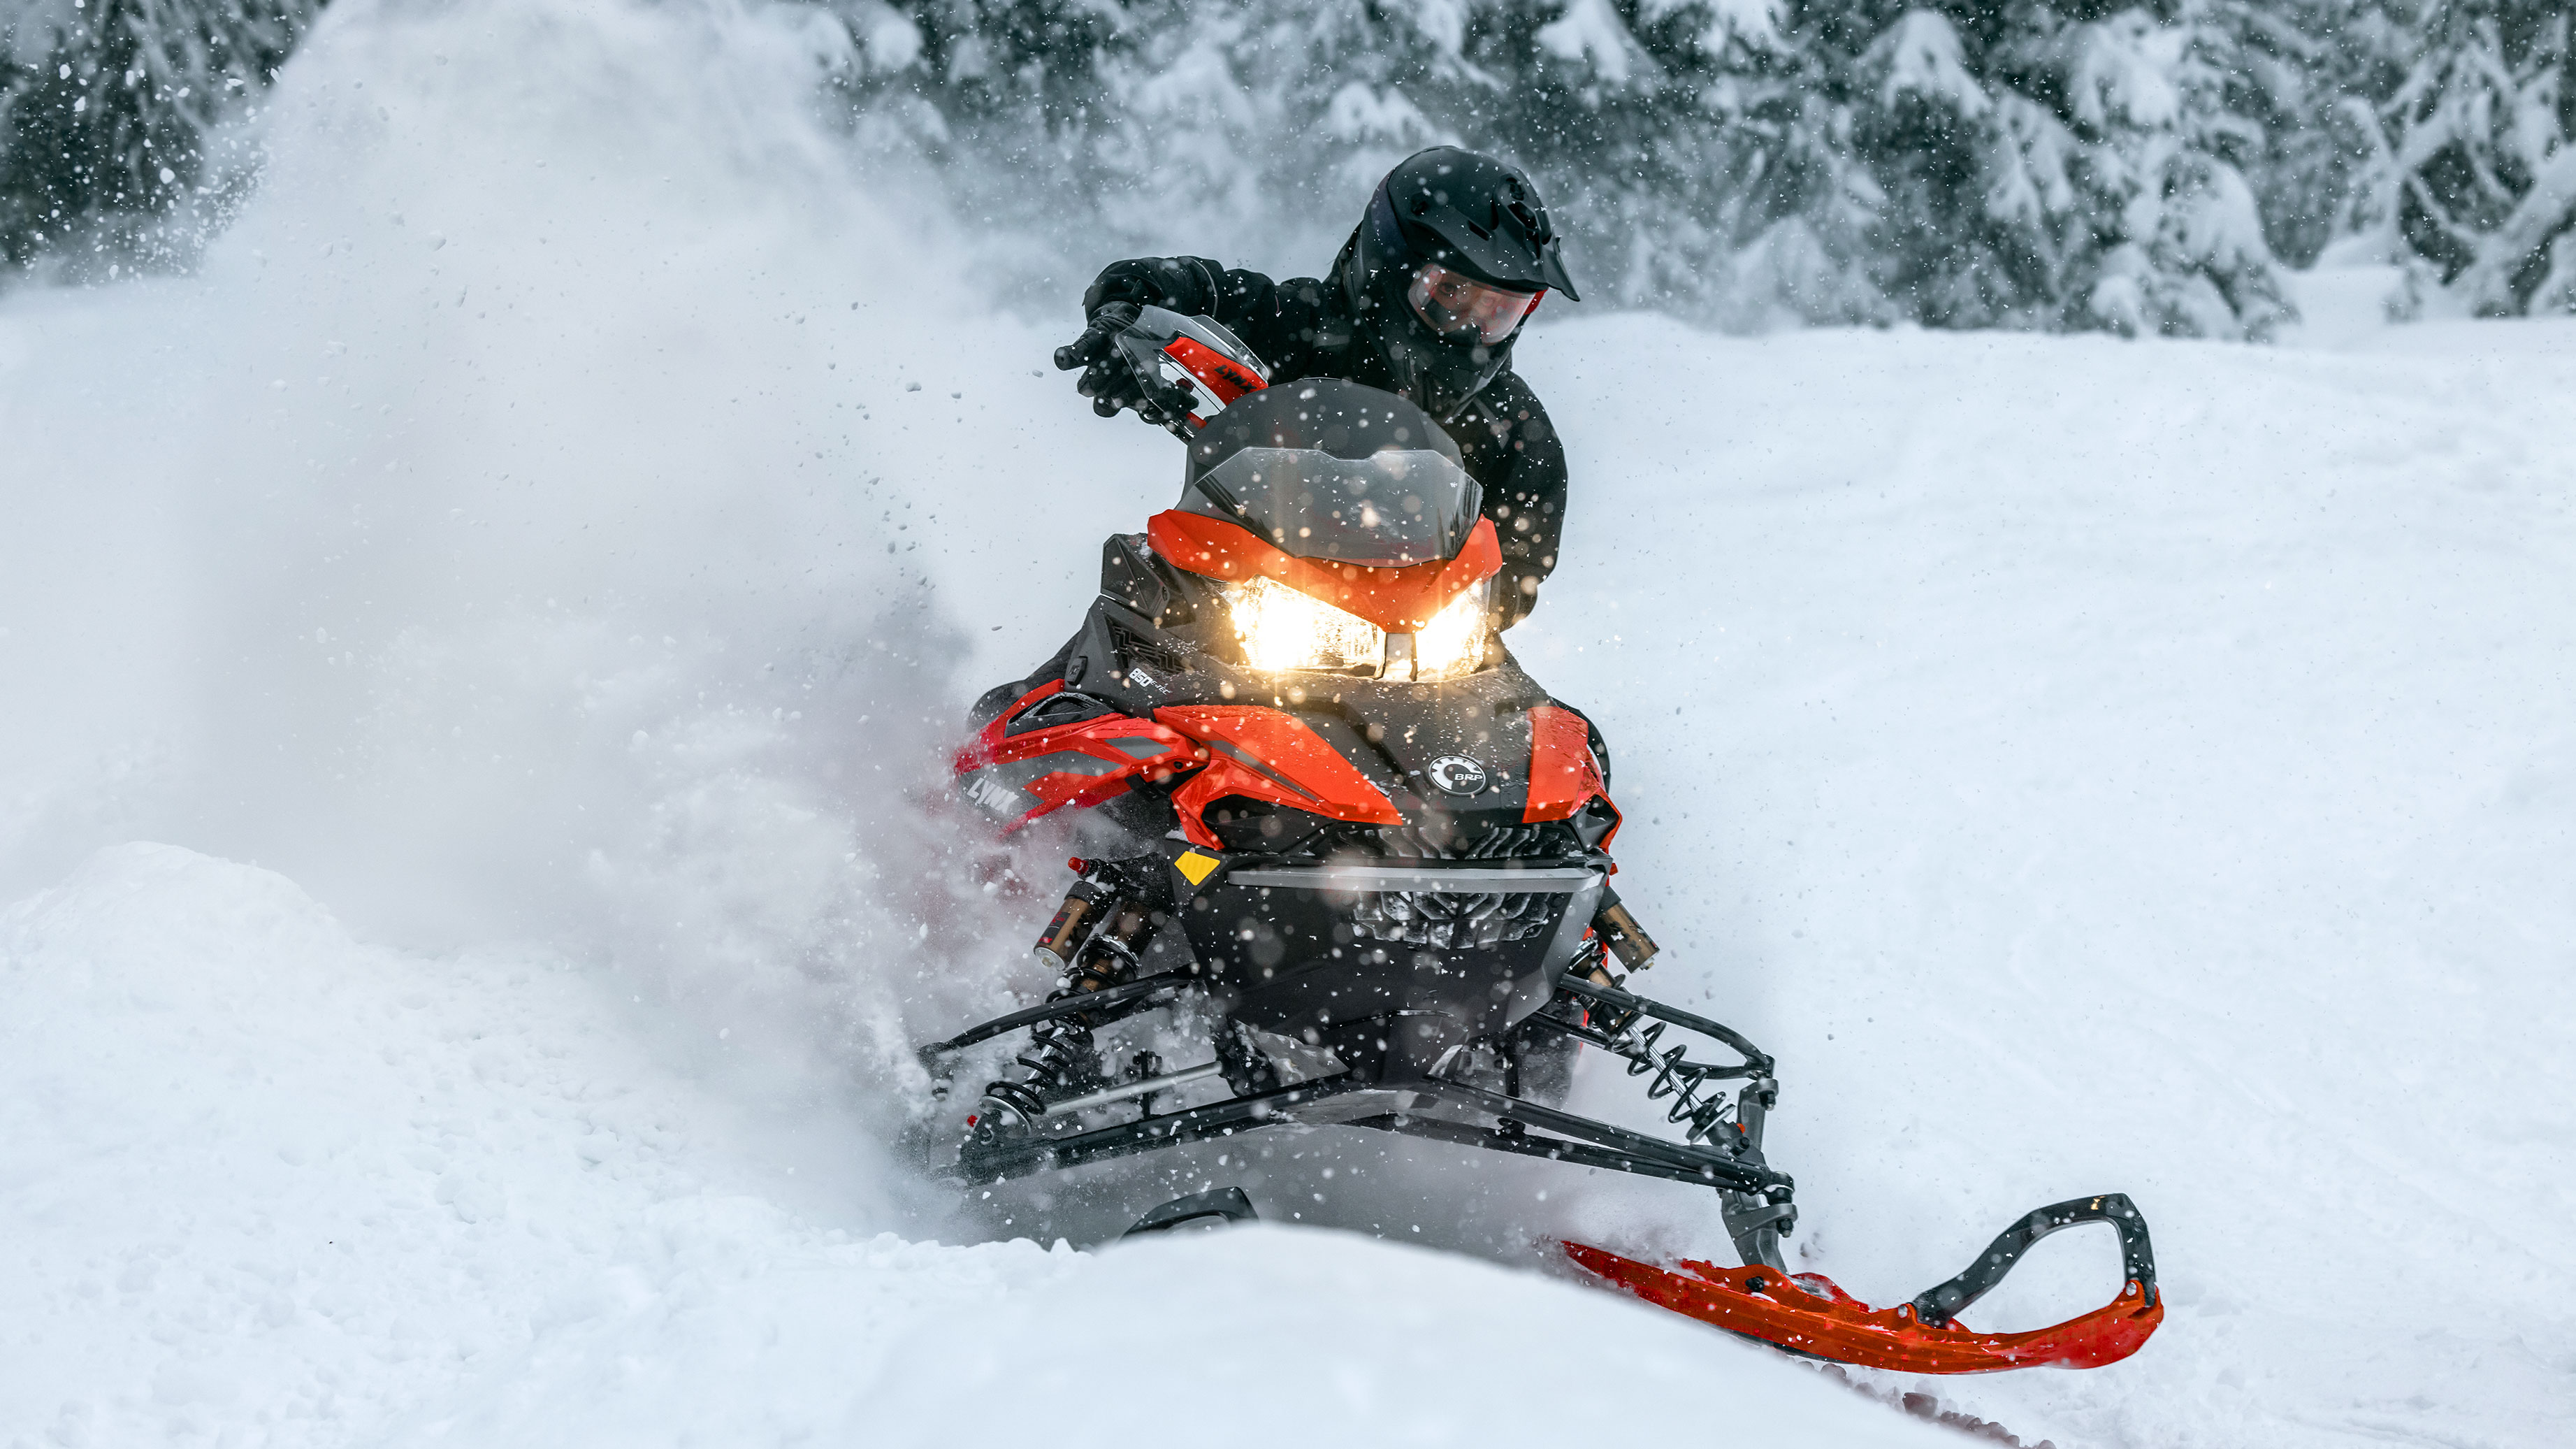 Rider blowing some snow on their 2023 Lynx snowmobile